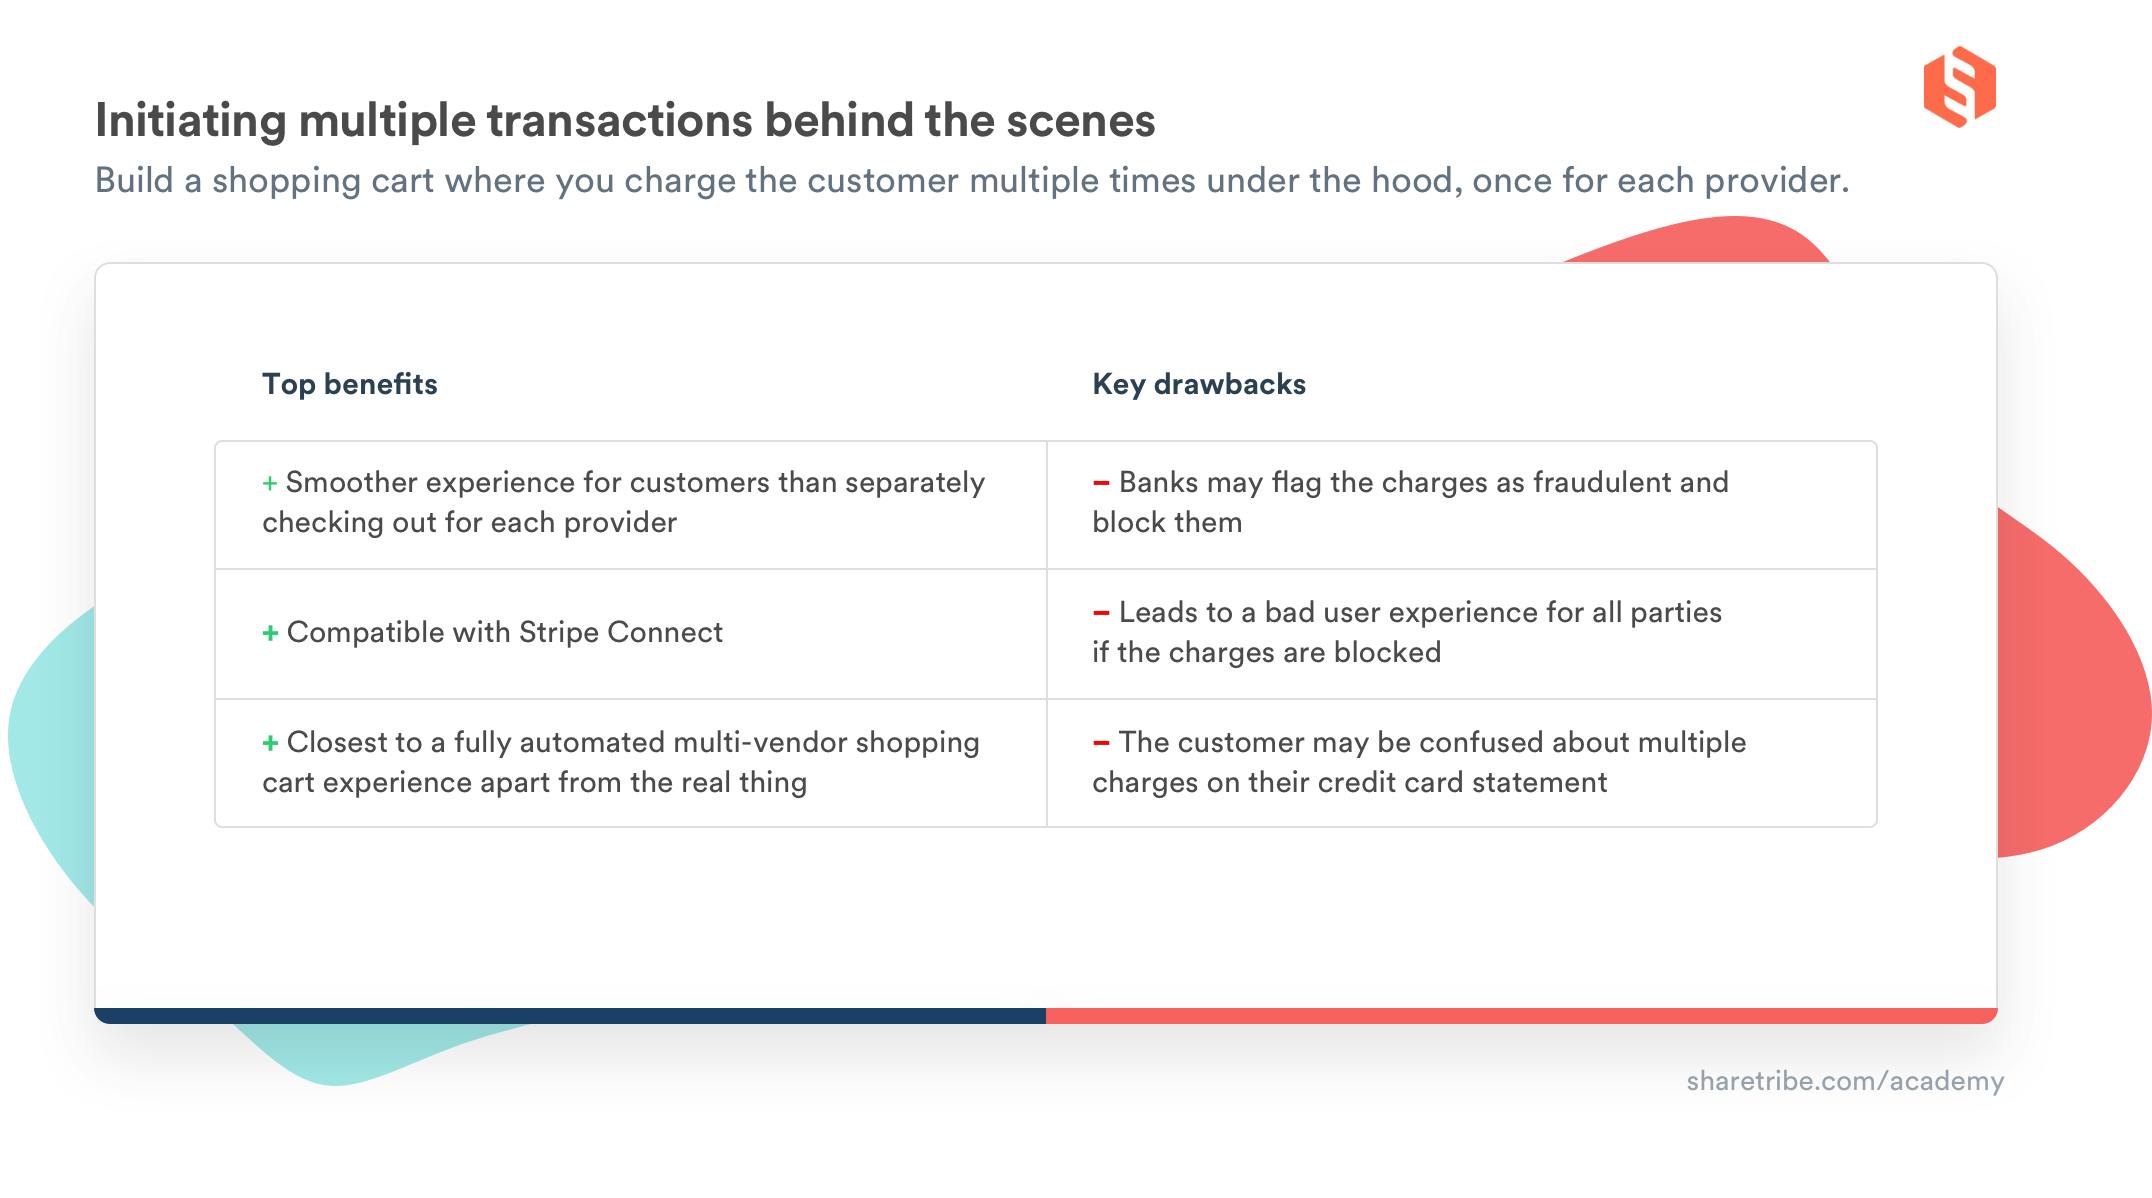 A table with the top benefits and key drawbacks of initiating multiple transactions behind the scenes. Top benefits: smoother experience for customers than separately checking out for each provider, compatible with Stripe Connect, closest to a fully automated multi-vendor shopping cart experience apart from the real thing. Key drawbacks: Banks may flag the charges as fraudulent and block them. Leads to a bad user experience for all parties if the charges are blocked. The customer may be confused about multiple charges on their credit card statement.